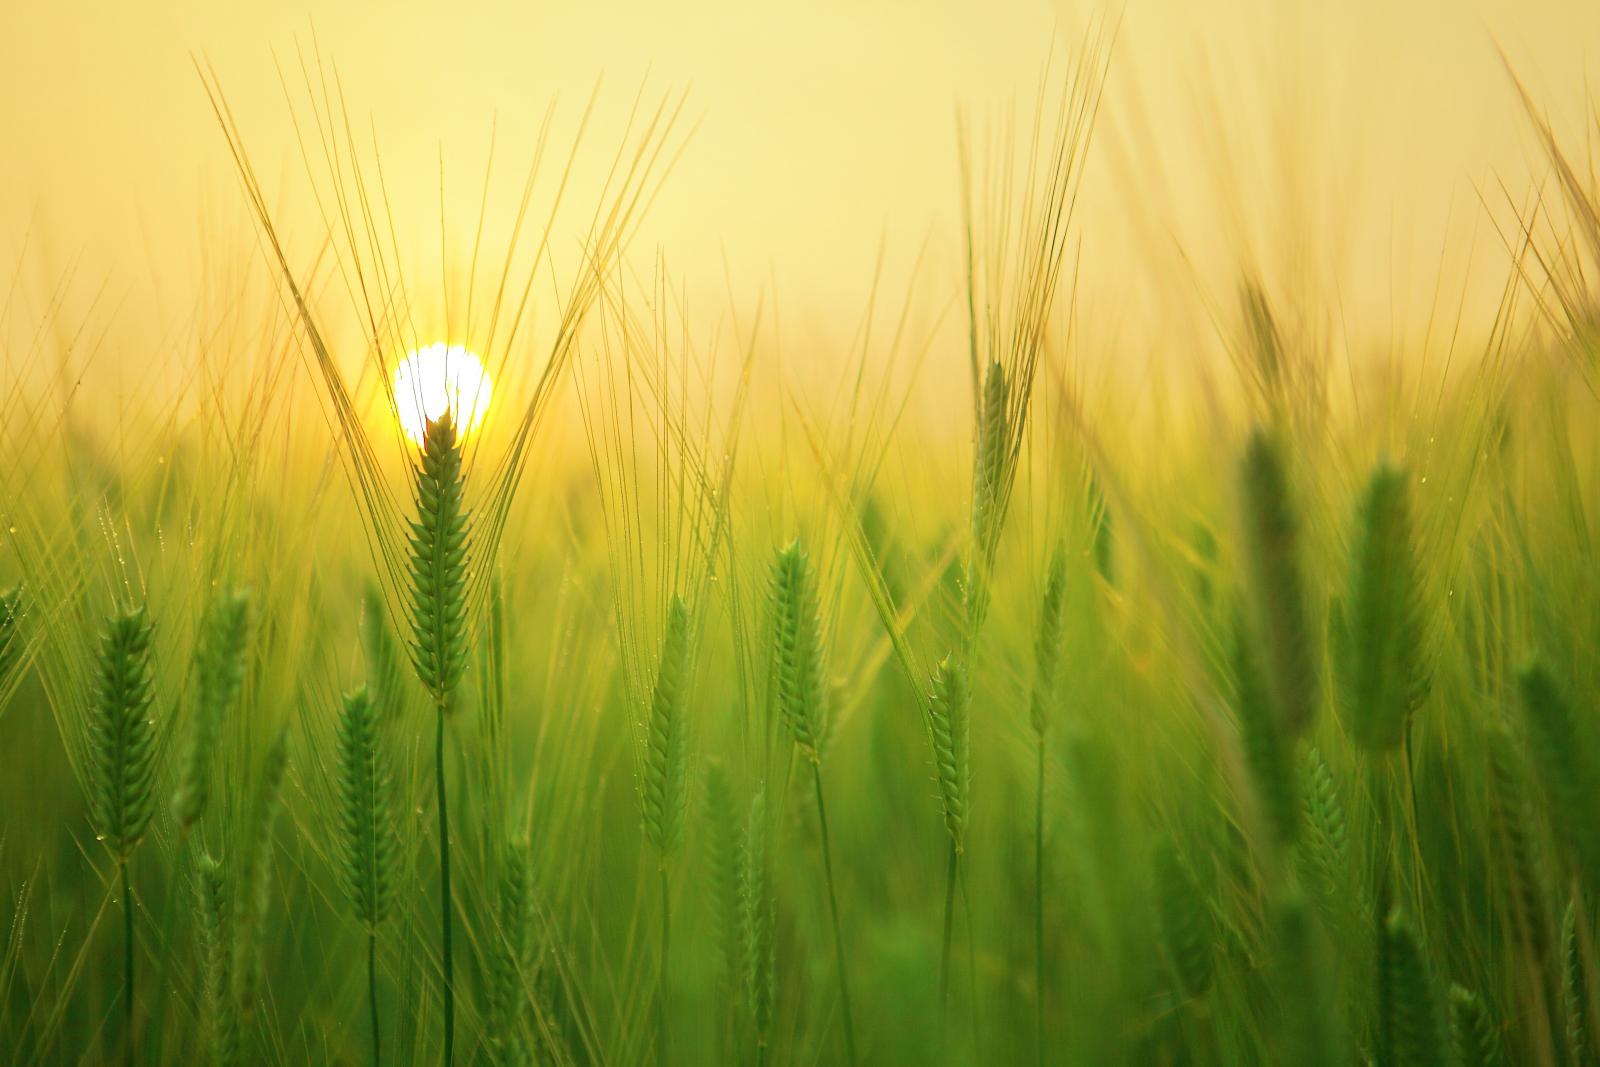 Sunlight over a field of barley. Photo credit: Pexels